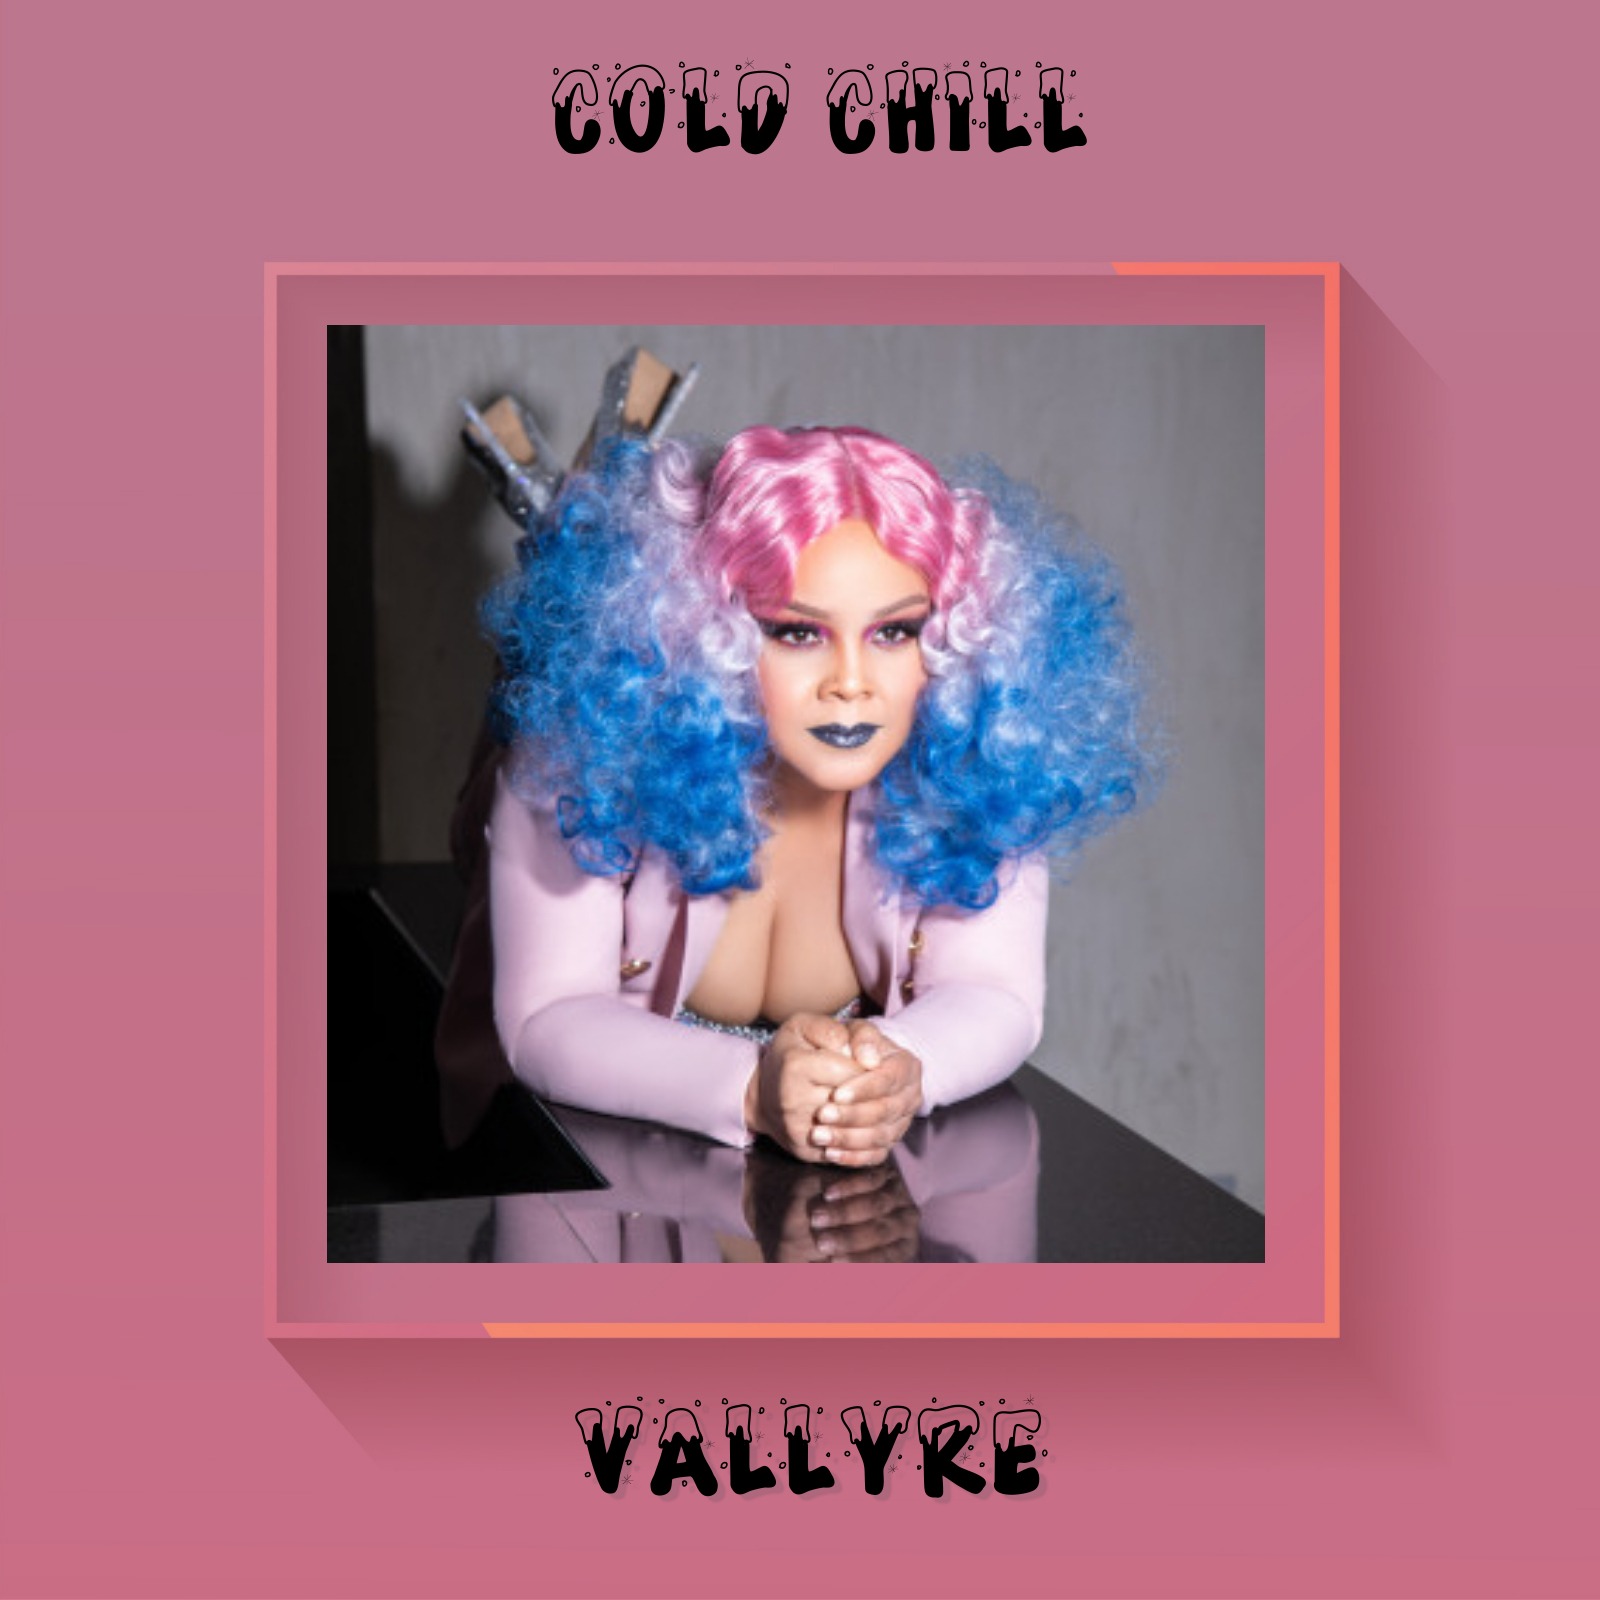 An Addicting And Sublime Up-Tempo Pop Track - Vallyre Drops Unique And Smashing Dance Single ‘COLDCHILL’